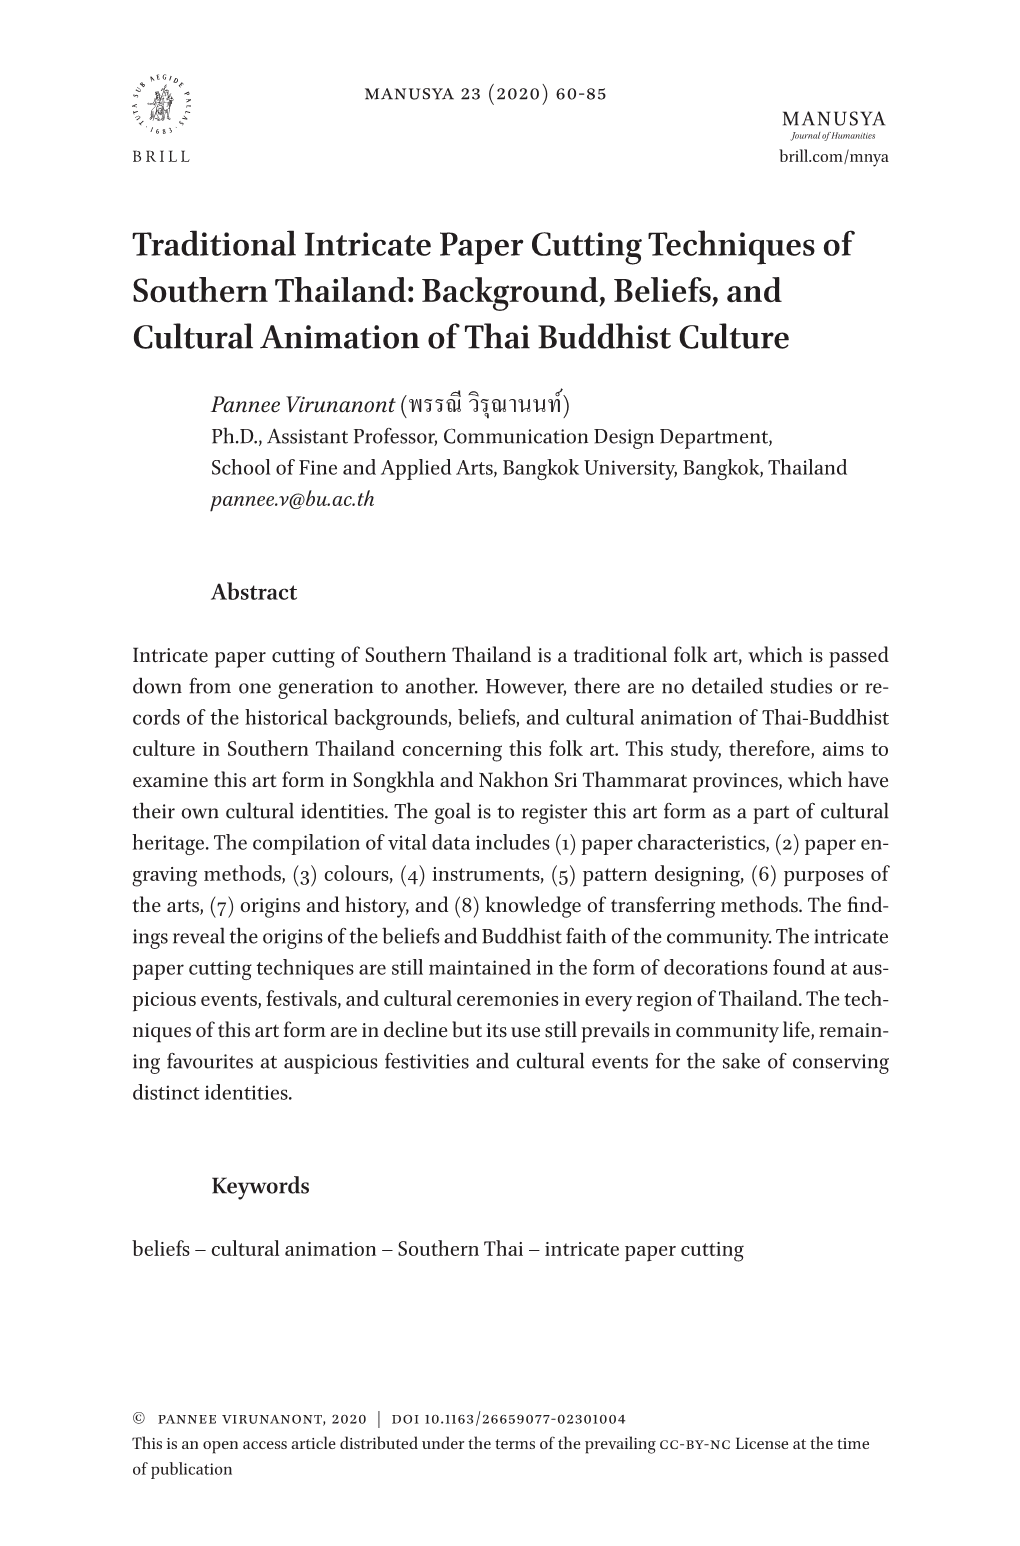 Traditional Intricate Paper Cutting Techniques of Southern Thailand: Background, Beliefs, and Cultural Animation of Thai Buddhist Culture